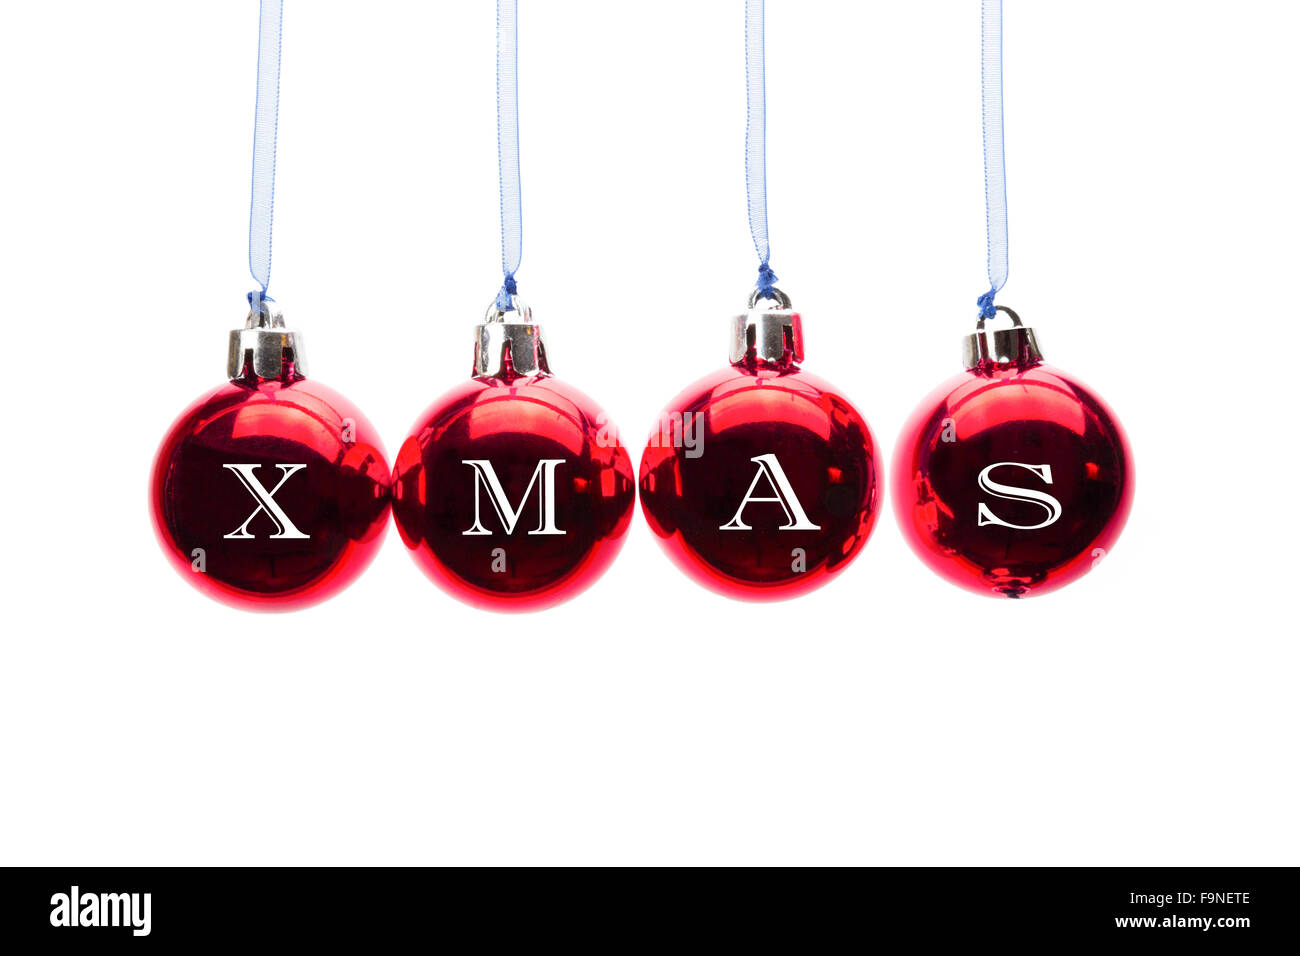 Word XMAS on red christmas balls hanging in a horizontal row isolated on white background Stock Photo